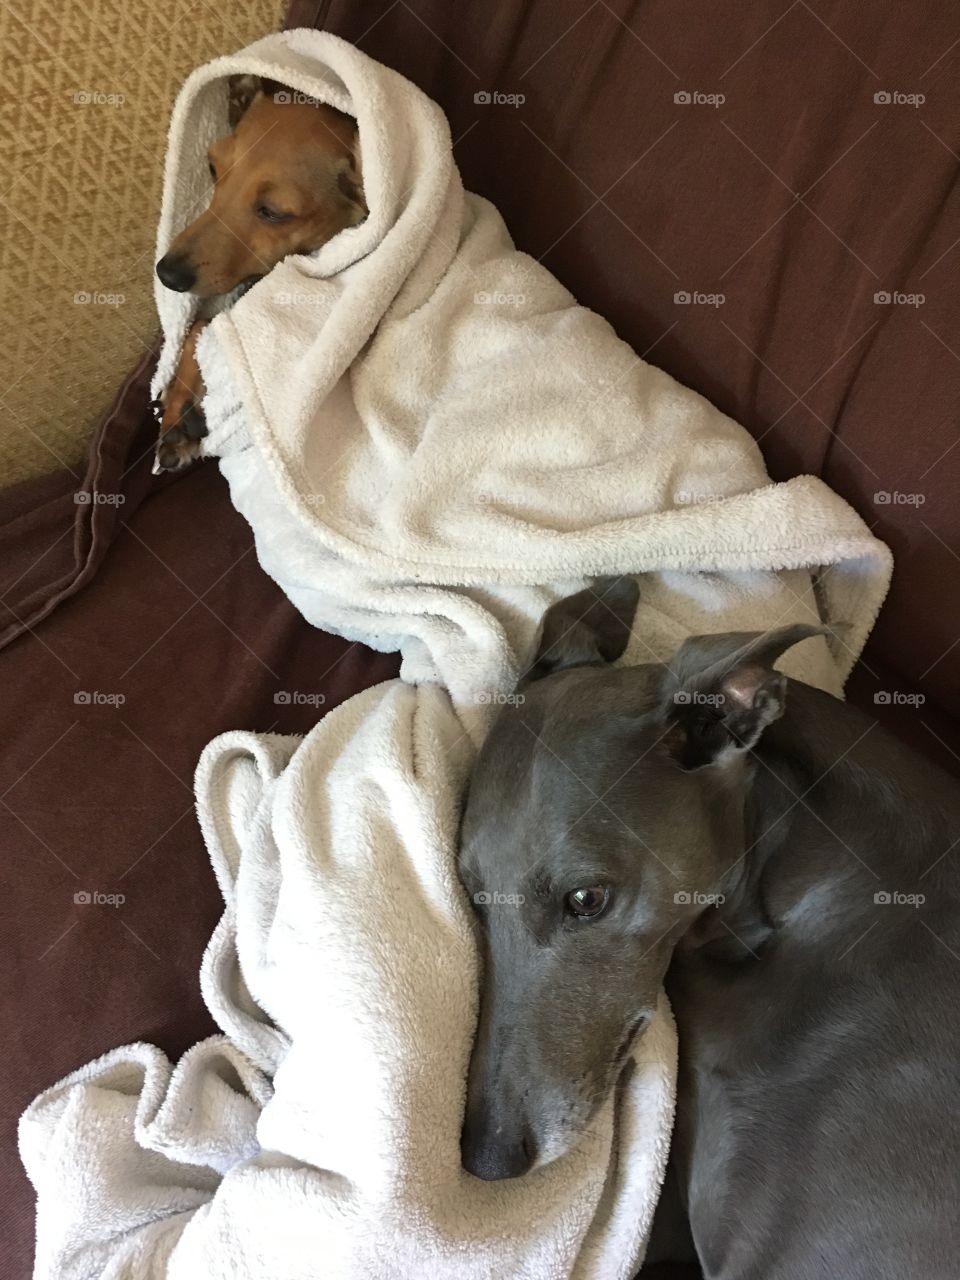 Amber the Italian greyhound puppy and Libby the whippet snuggled up together on the sofa relaxing 